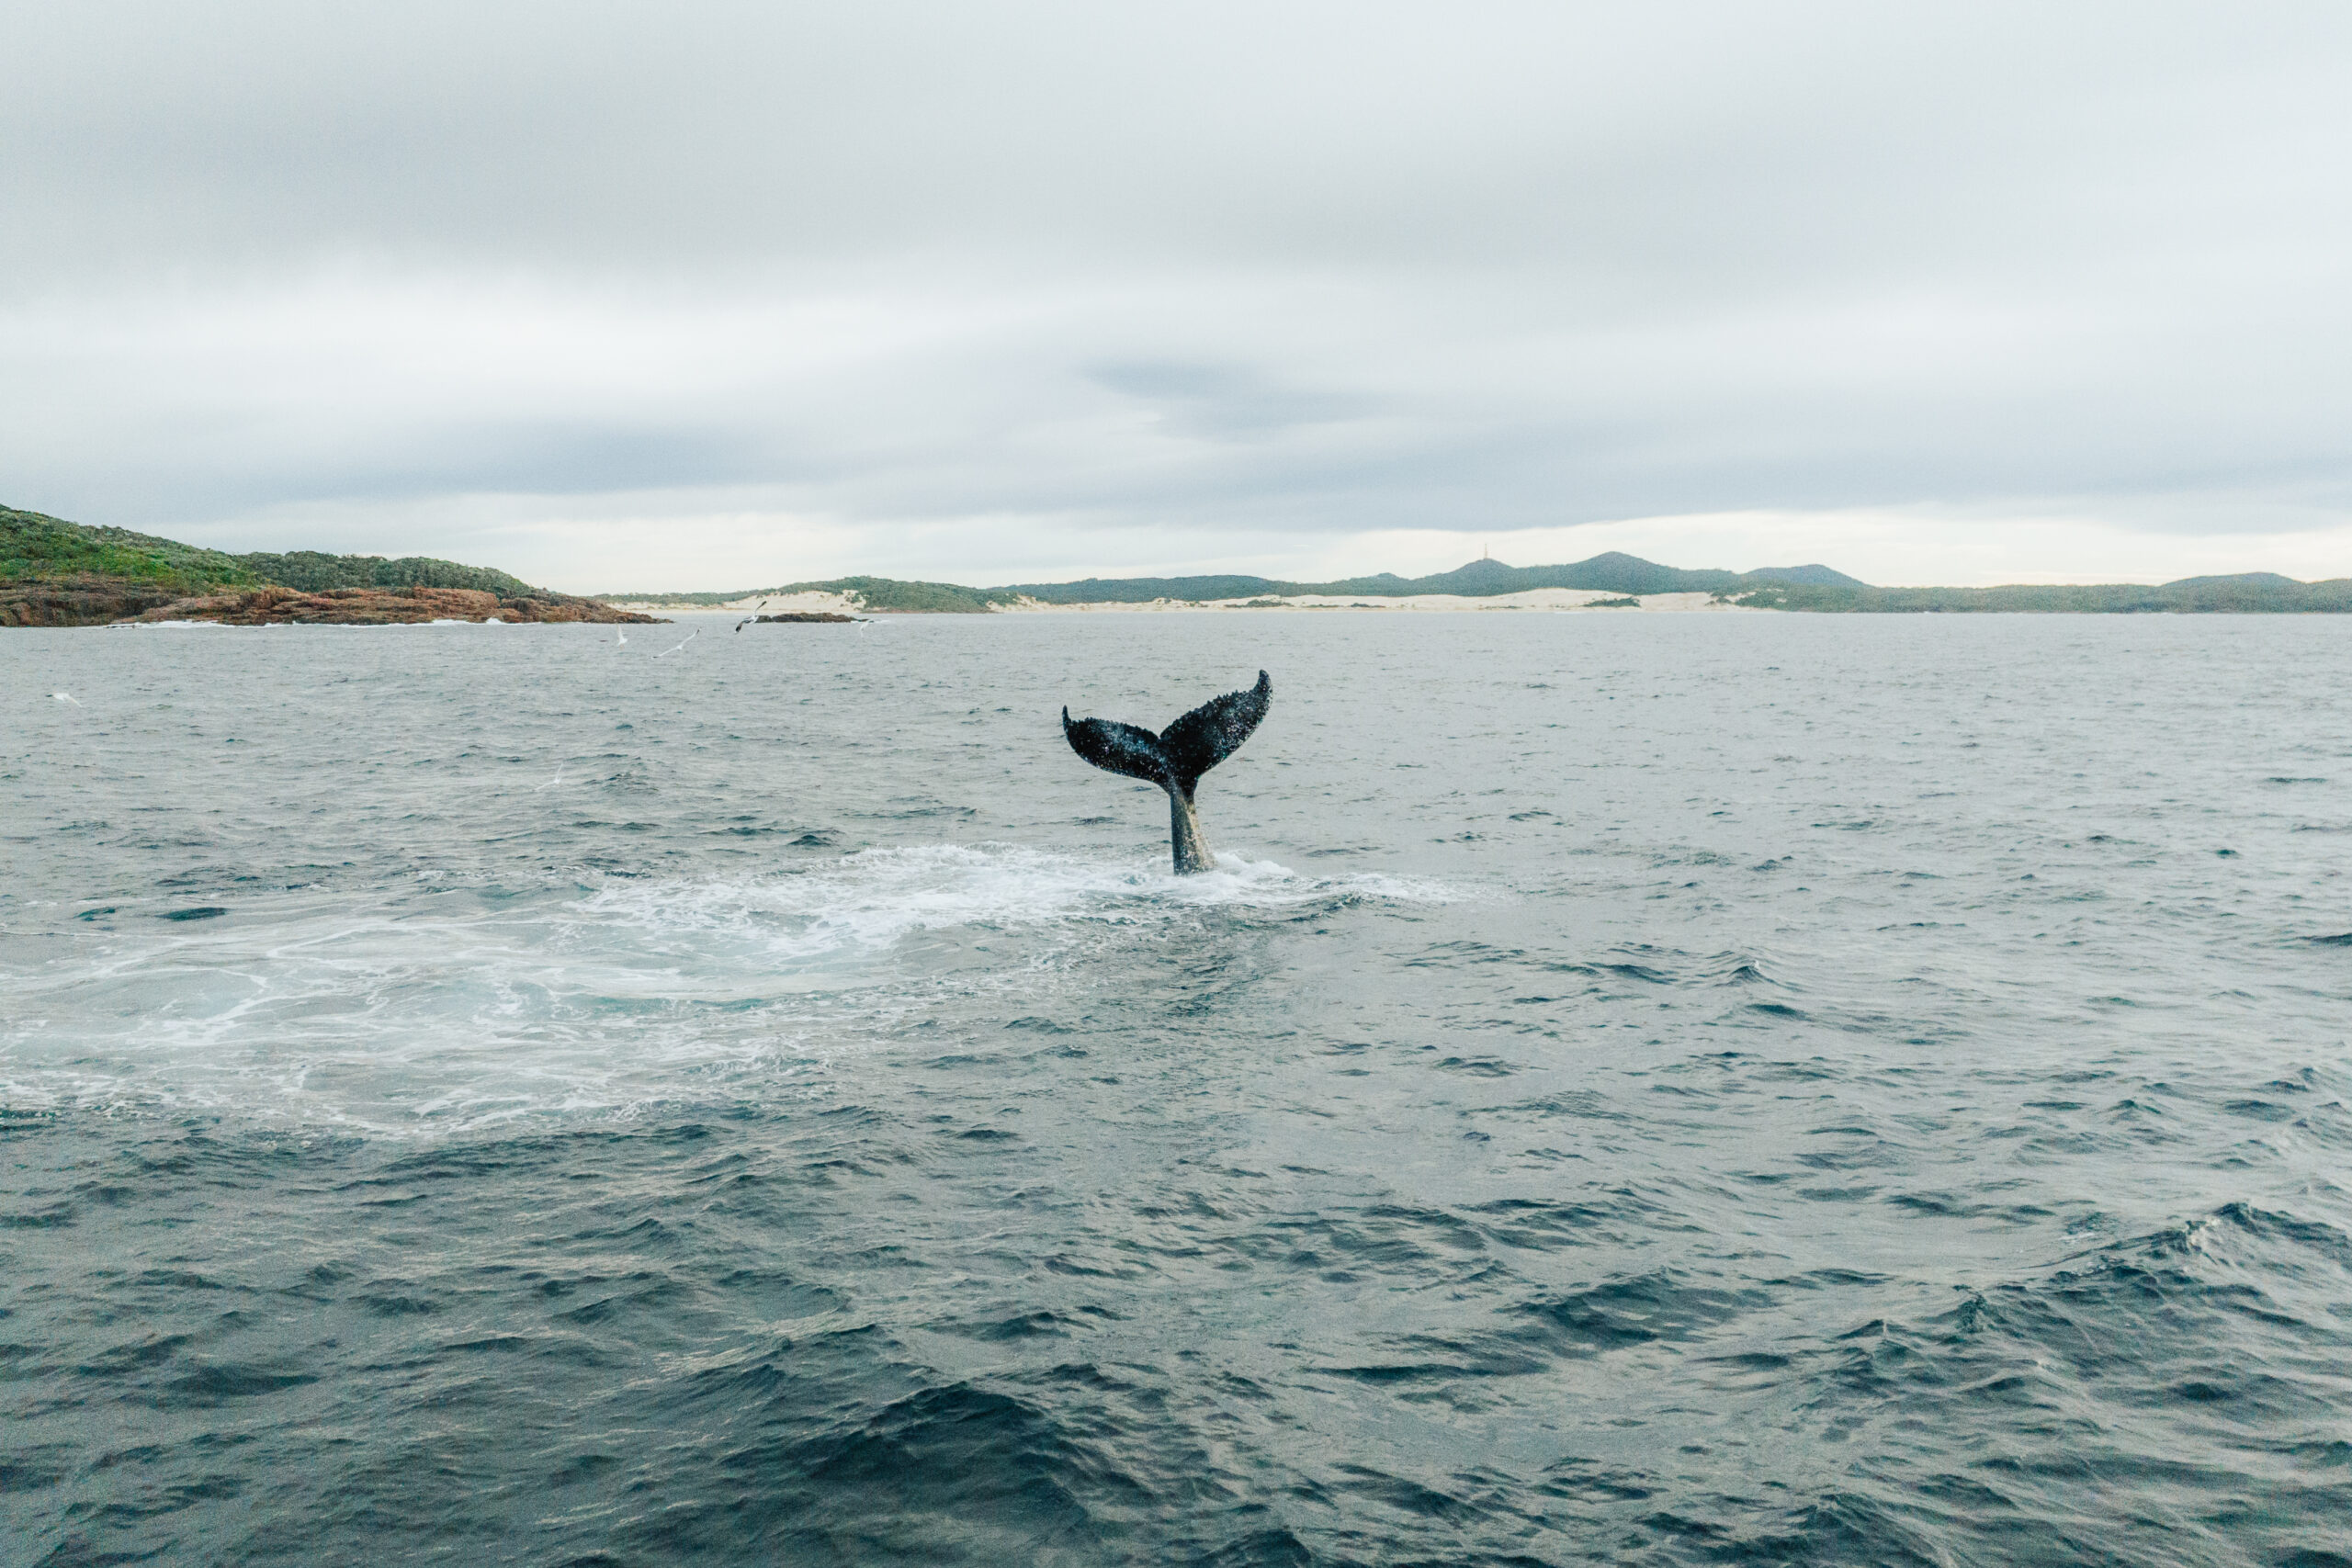 Whale in coastal waters. Tomaree National Park. Photo credit: Remy Brand / DPE